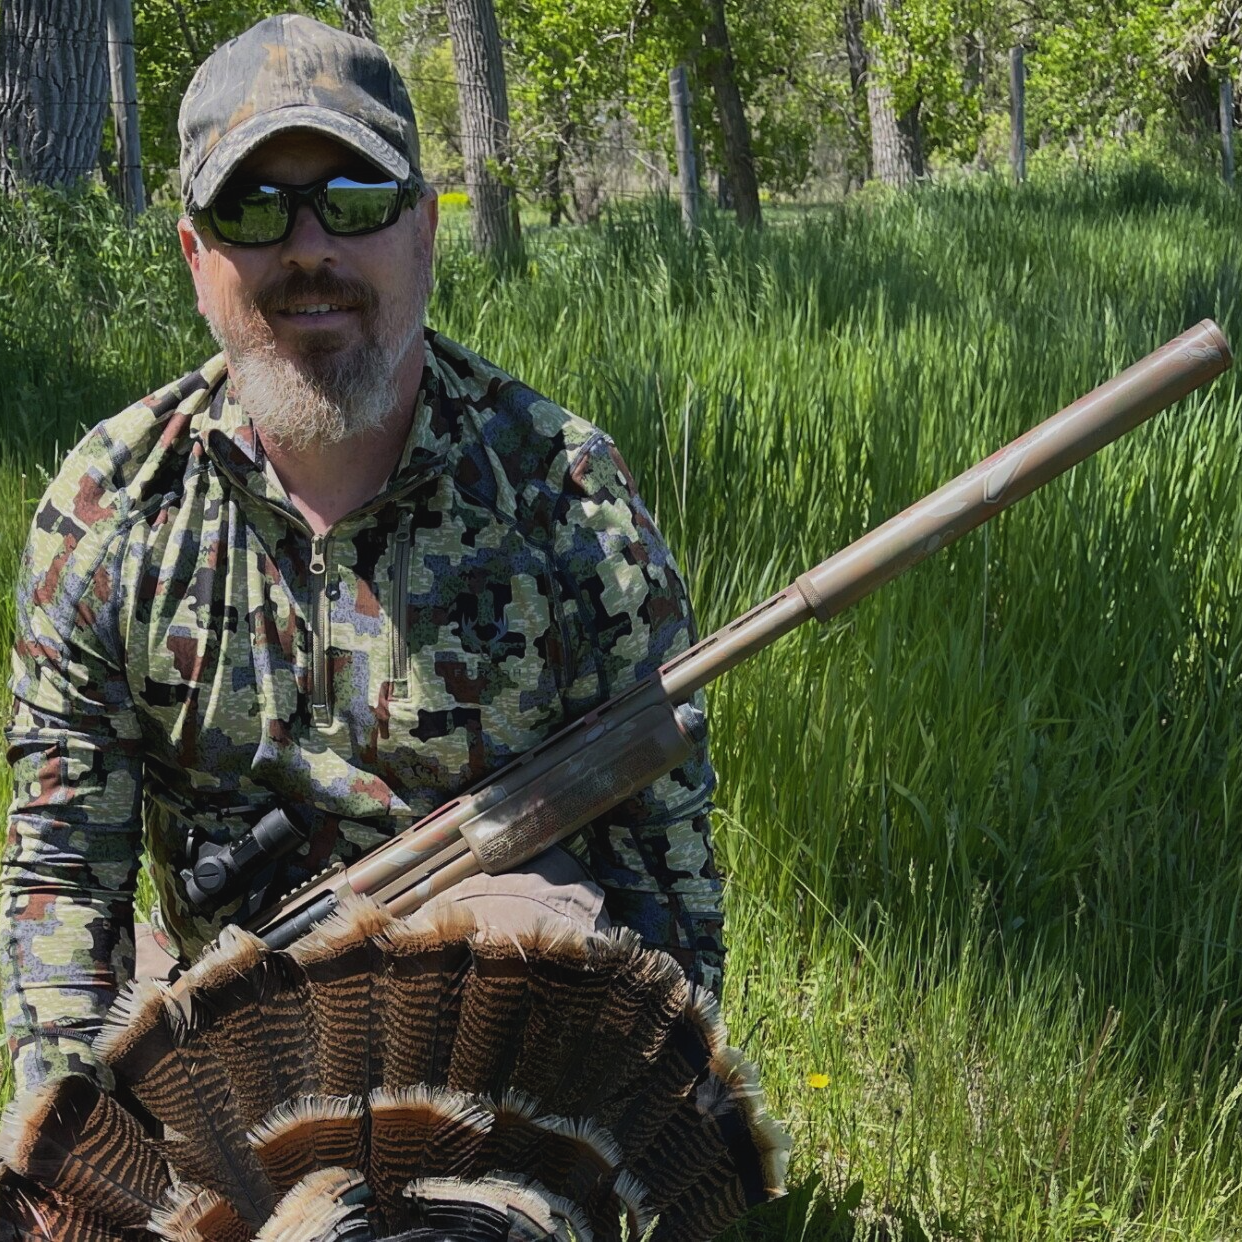 Aaron Cayce hunting with an Integrally Suppressed Shotgun